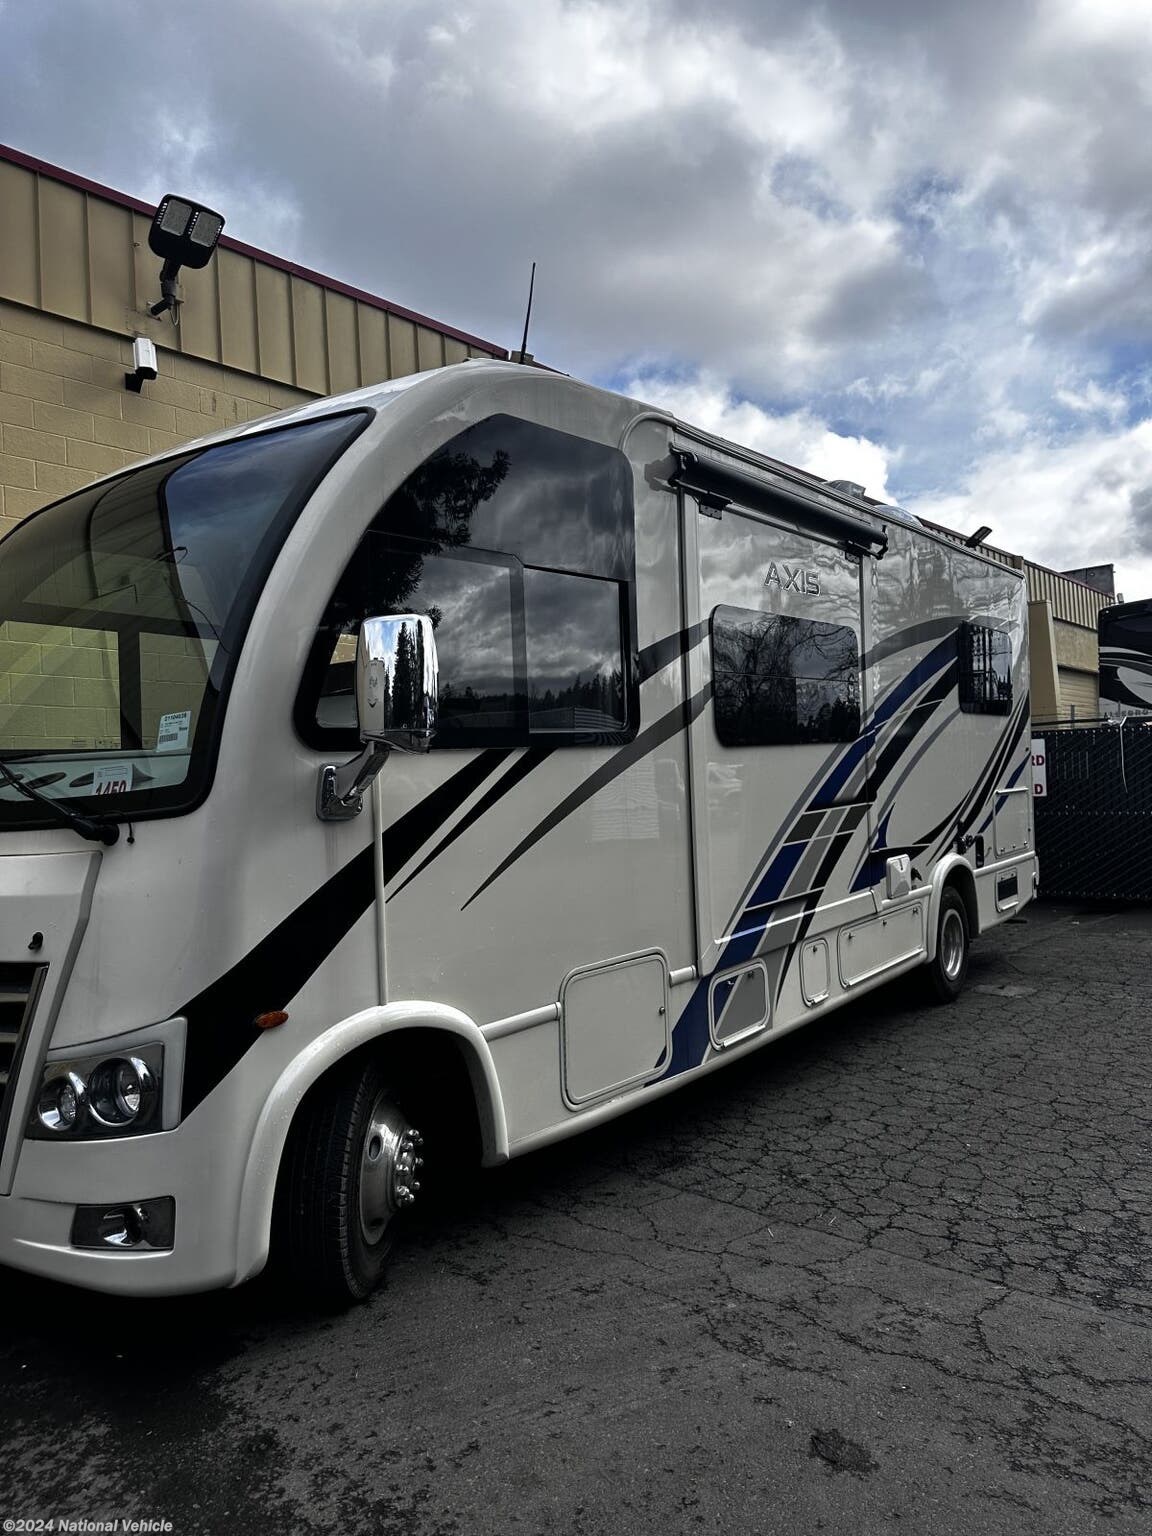 2023 Thor Motor Coach Axis  RV for Sale in Renton, WA 98055 | c415923 |   Classifieds